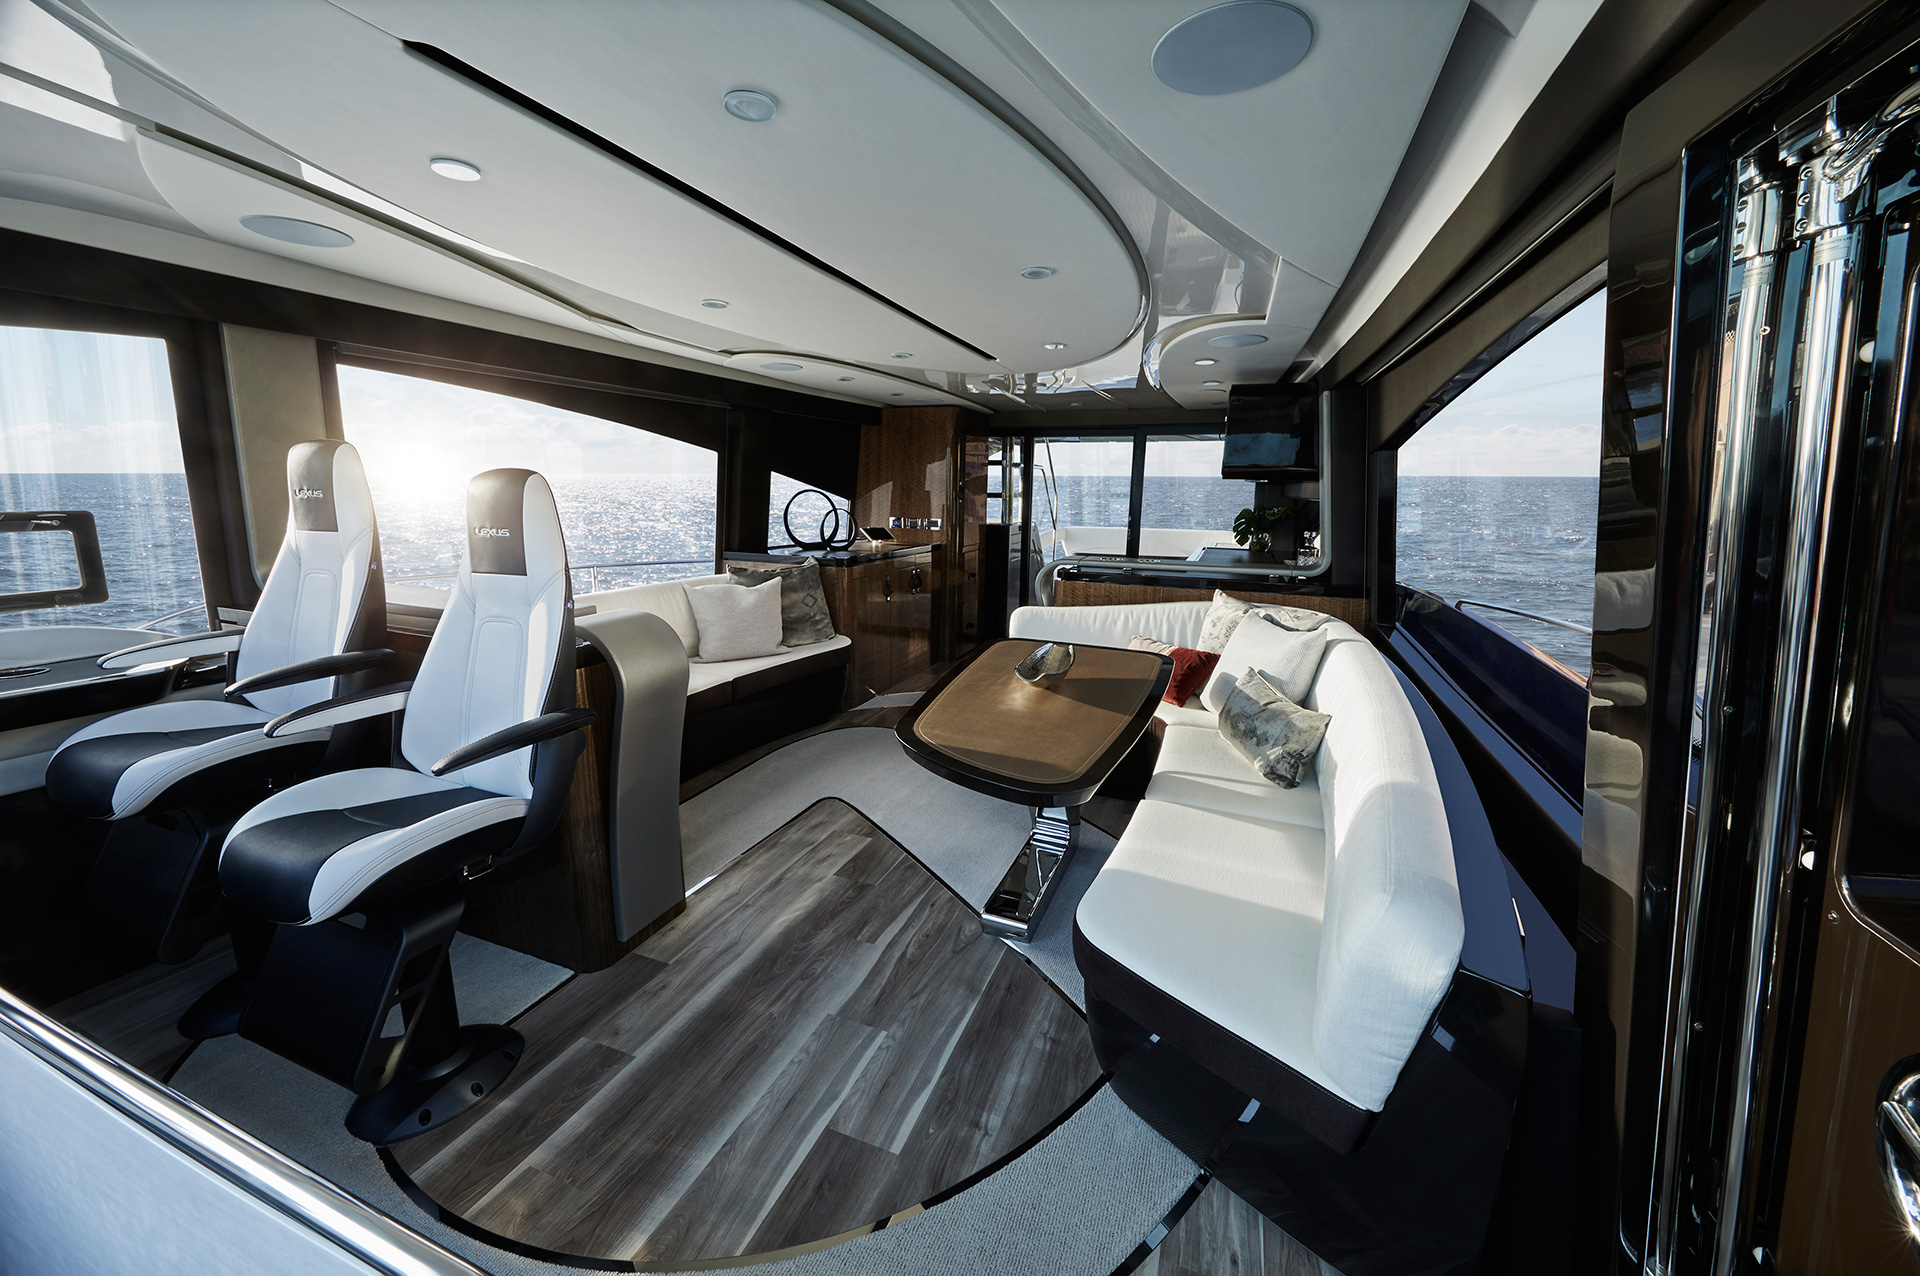 A view of the main cabin area inside the Lexus LY 680 yacht.